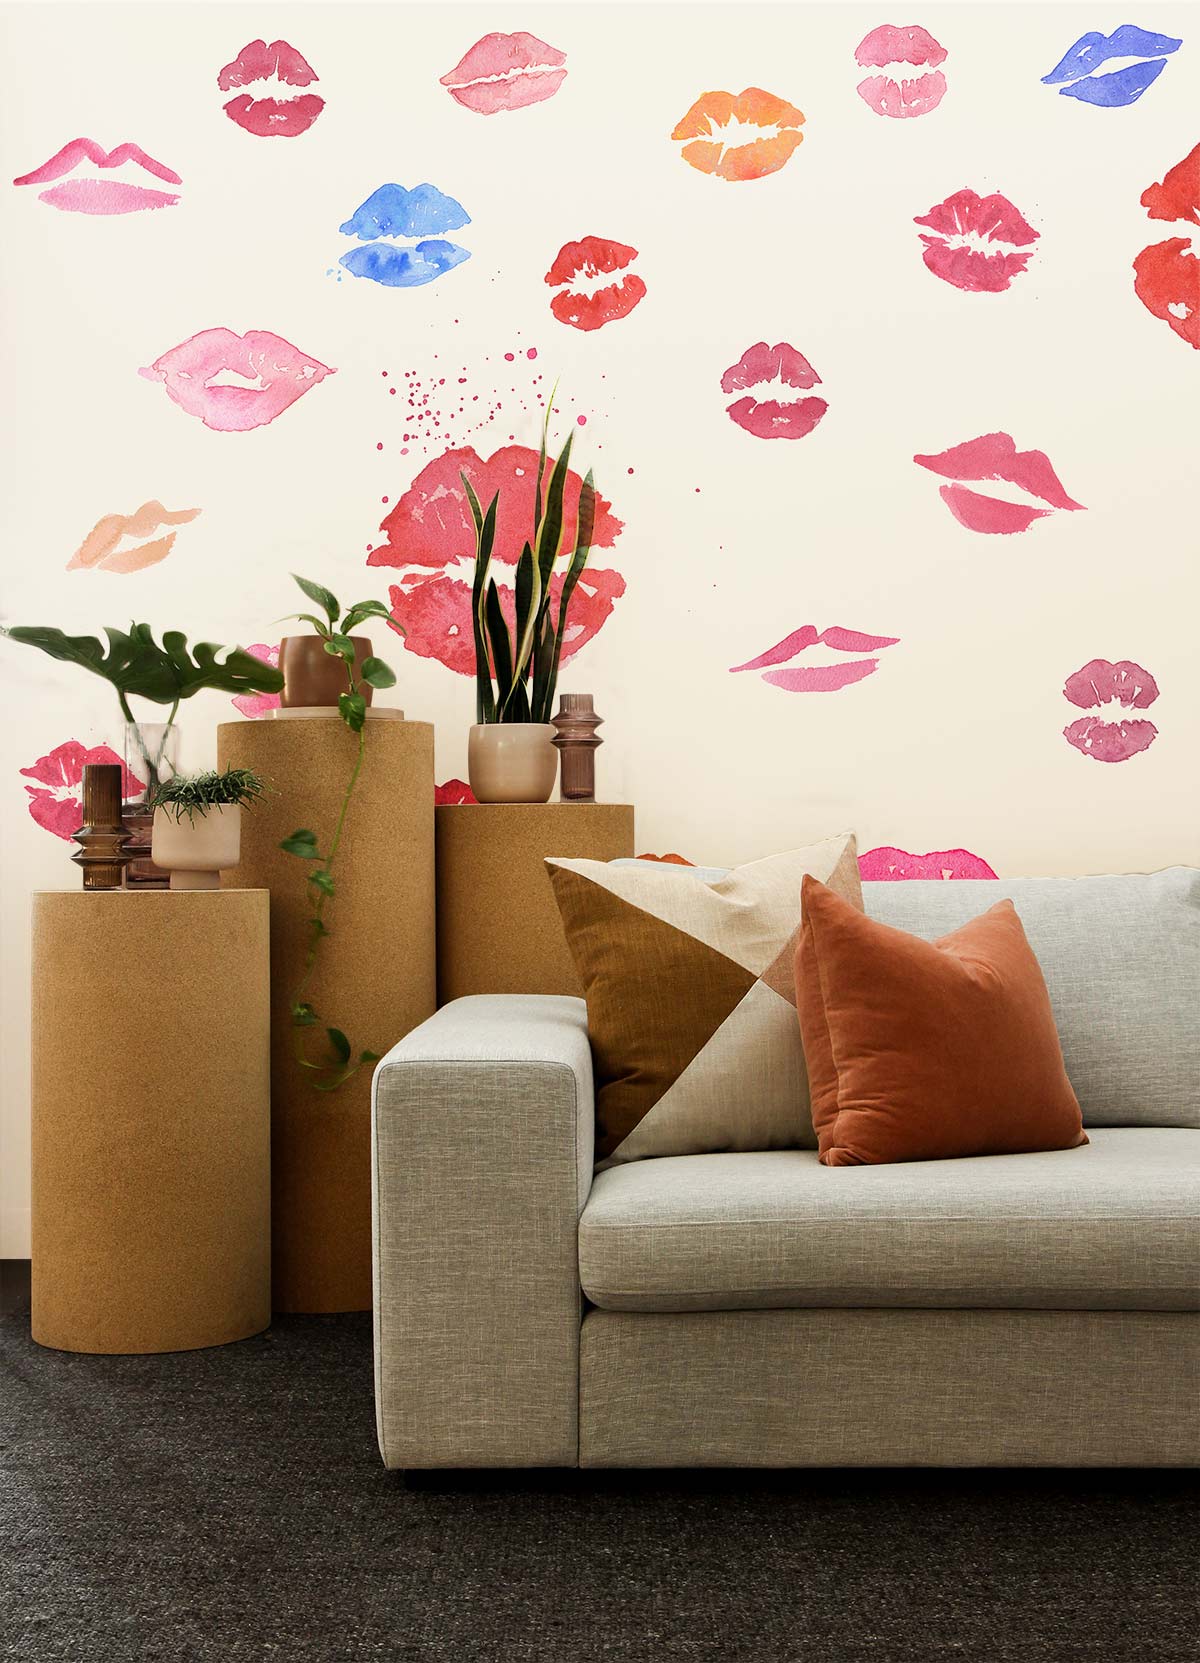 Lips Pattern of different colors Mural Wallpaper for living room